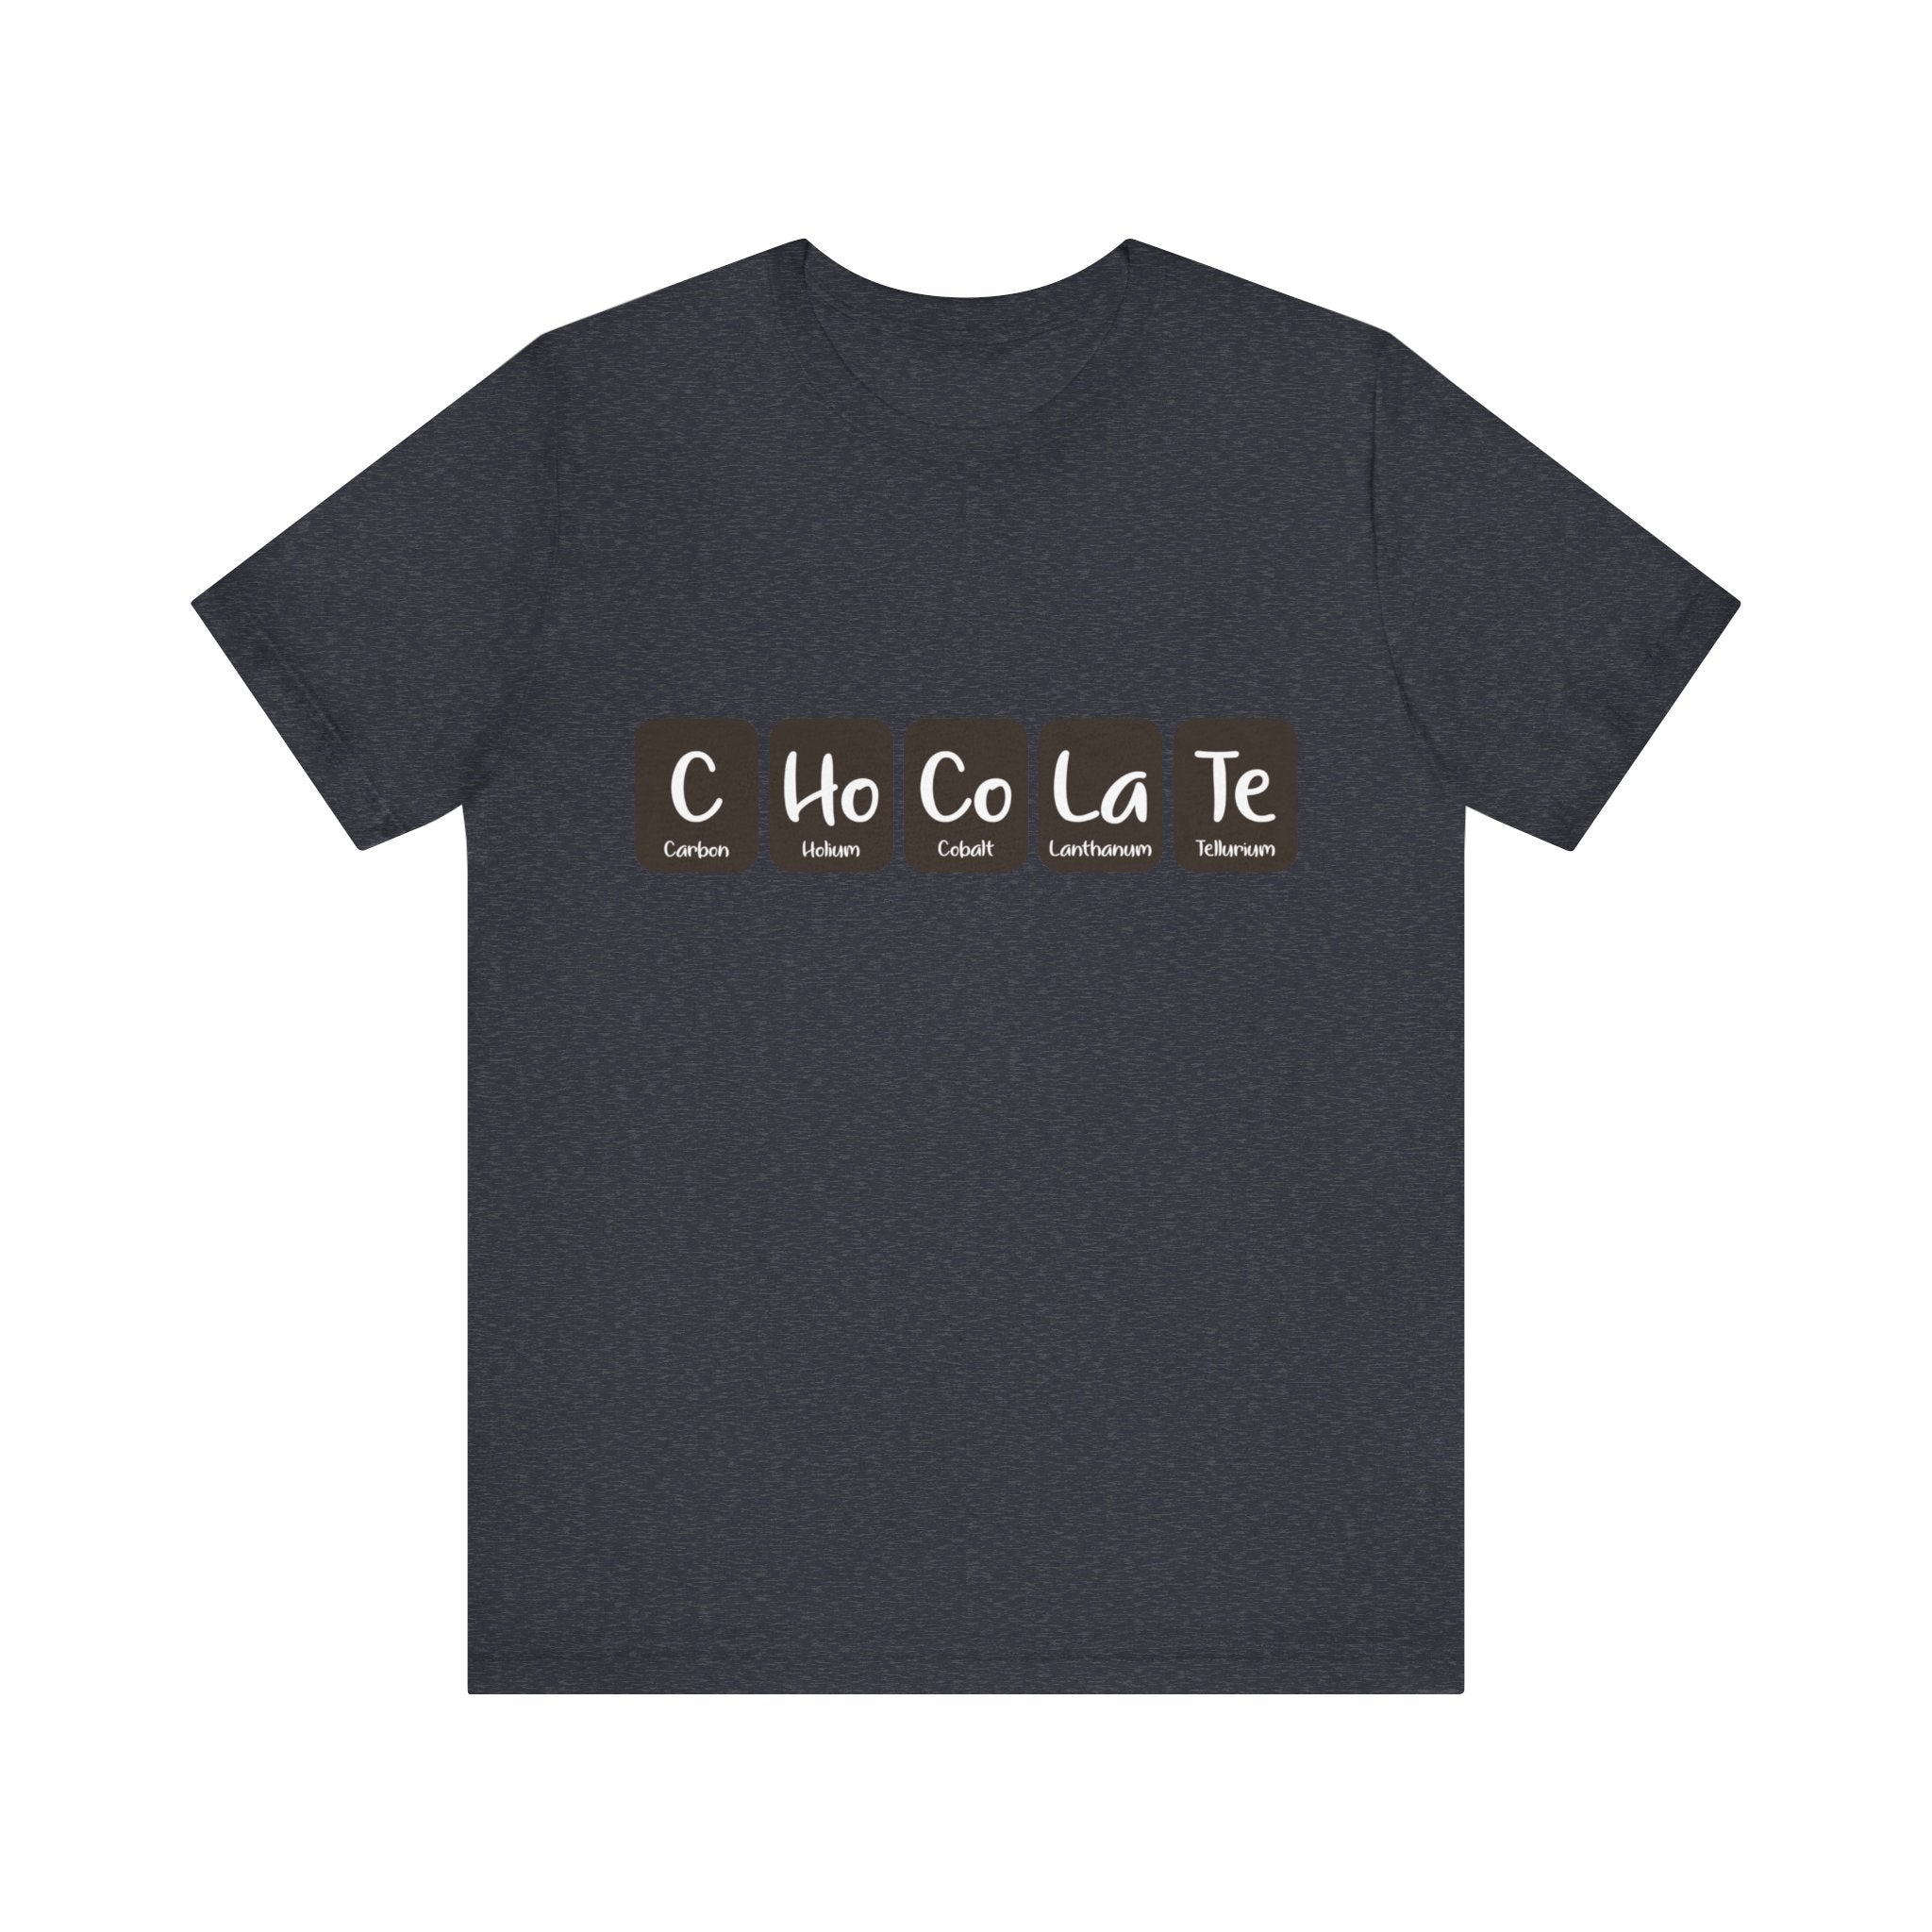 A fashionable black t-shirt features the word "C-Ho-Co-La-Te - T-Shirt" creatively spelled out using elements from the periodic table: Carbon (C), Holmium (Ho), Cobalt (Co), Lanthanum (La), and Tellurium (Te).